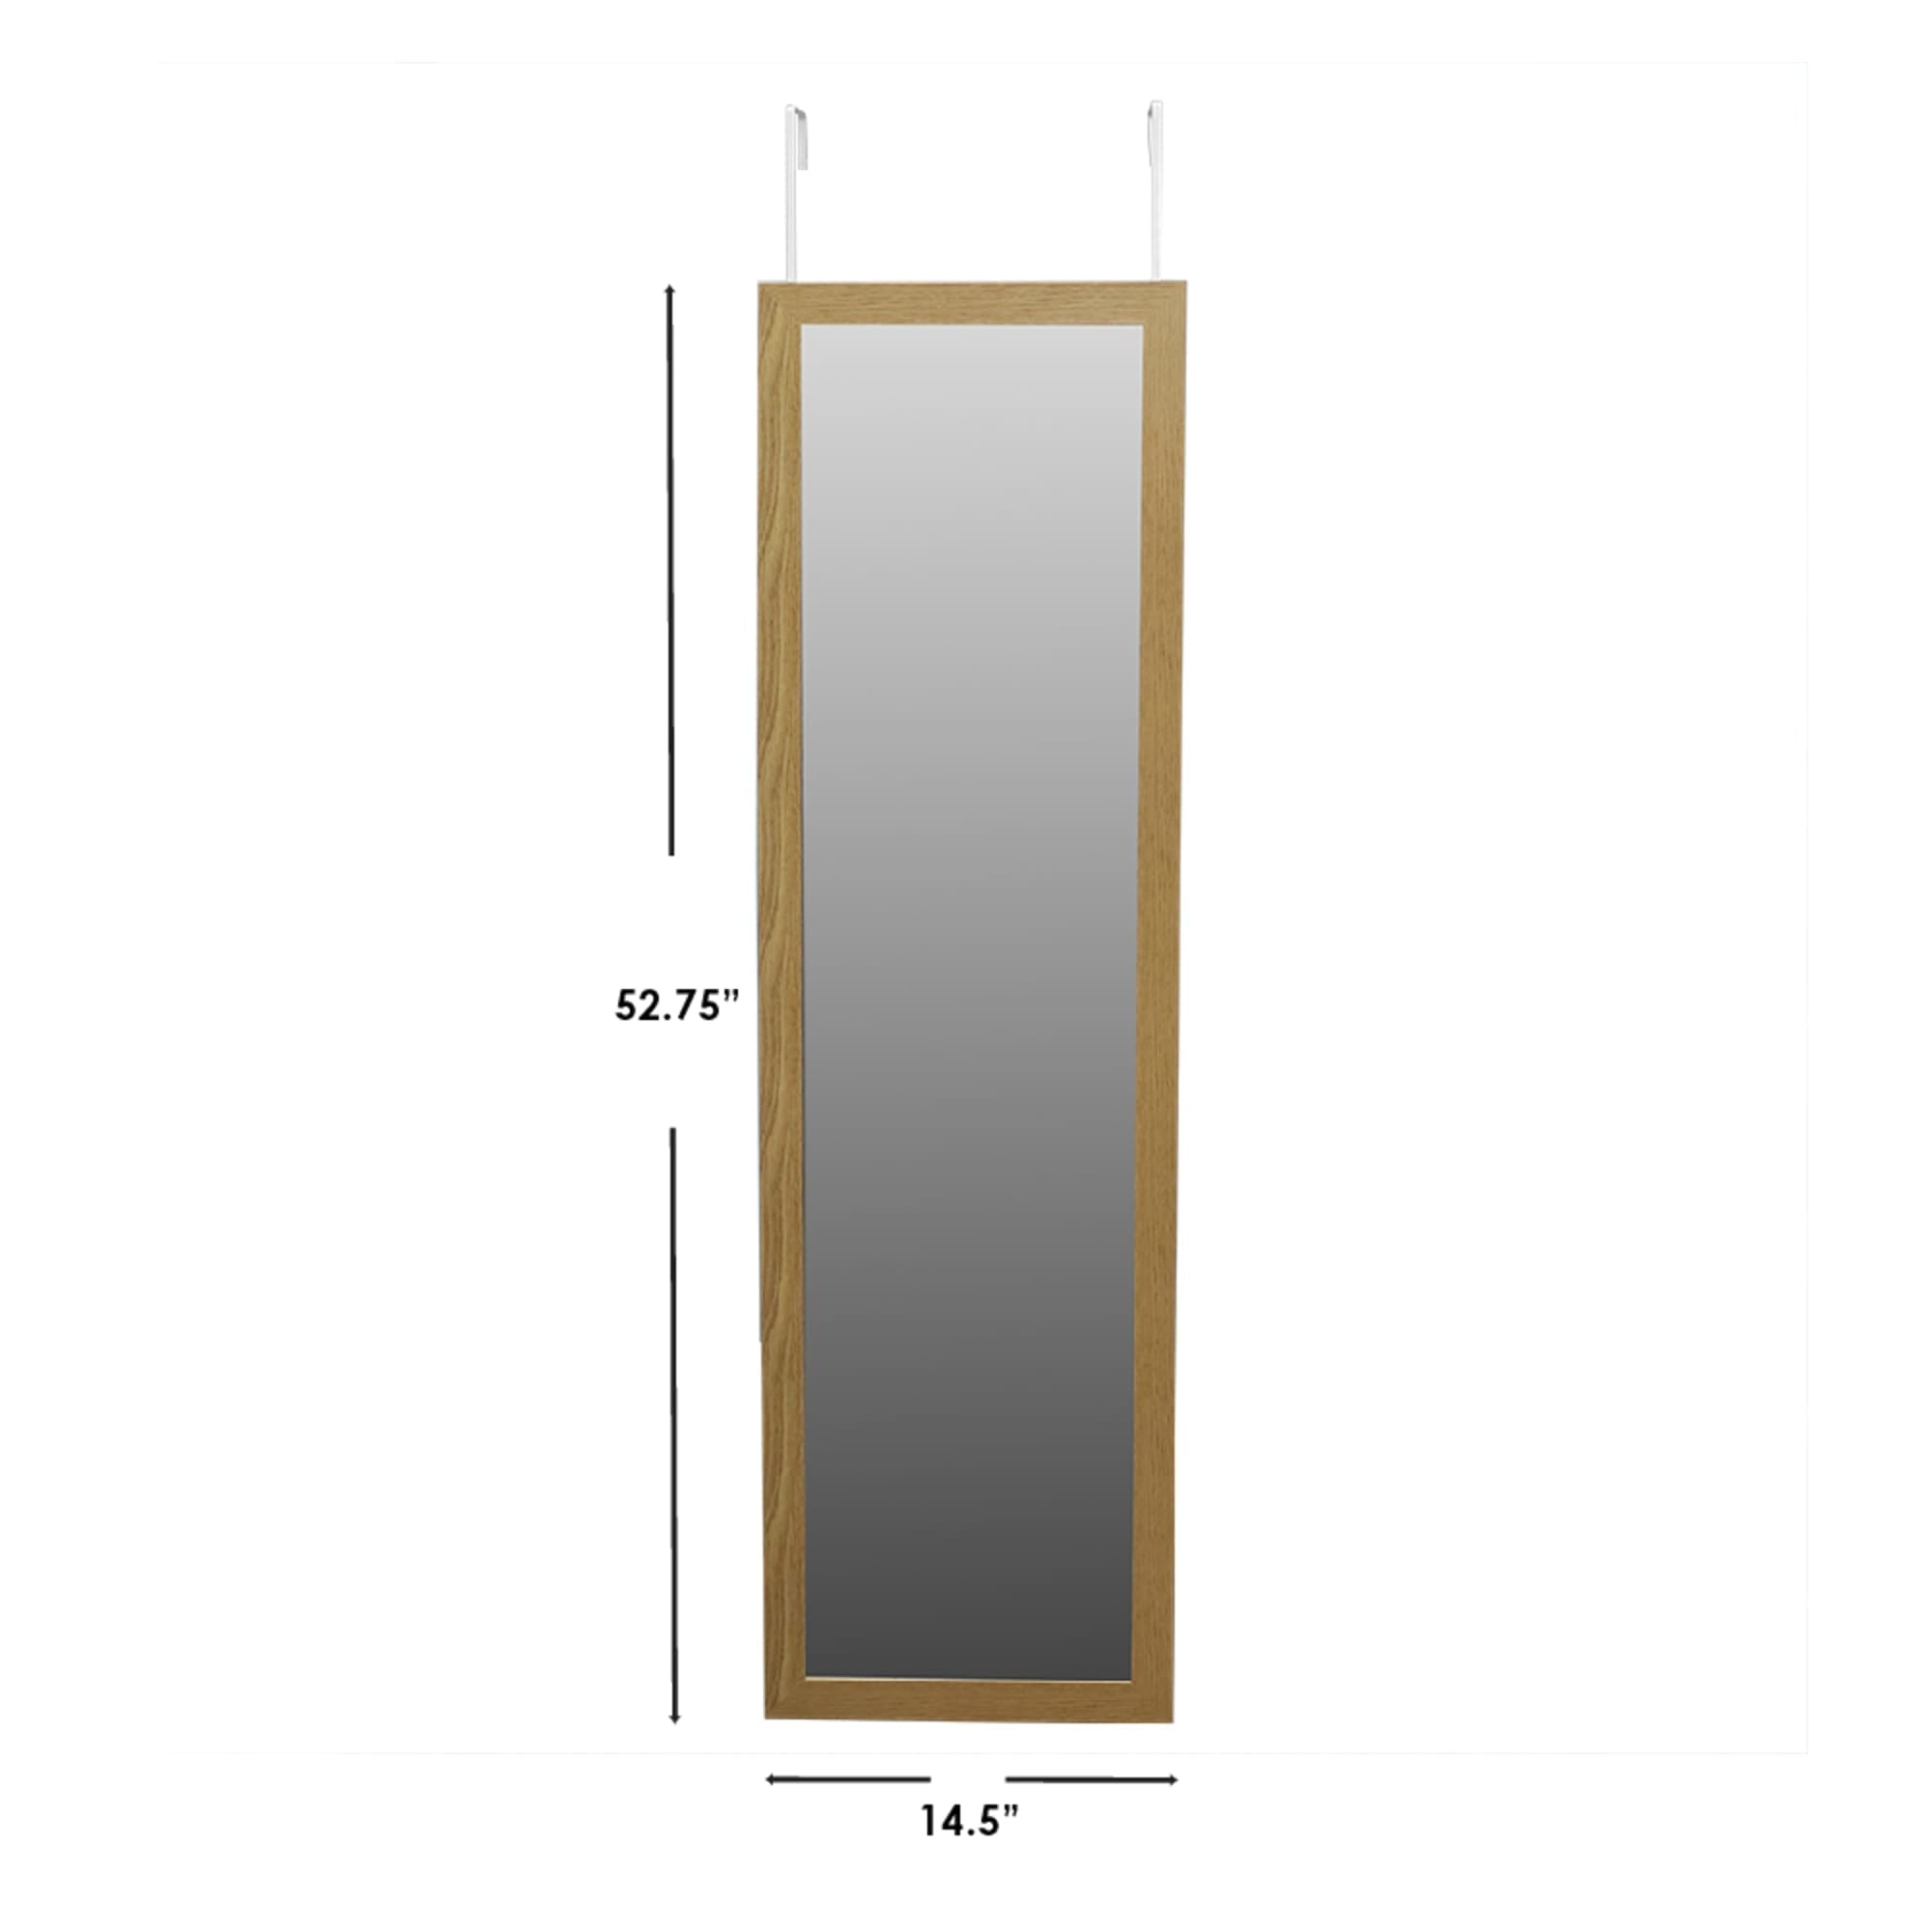 Home Basics Over The Door Mirror, Natural $12.00 EACH, CASE PACK OF 6